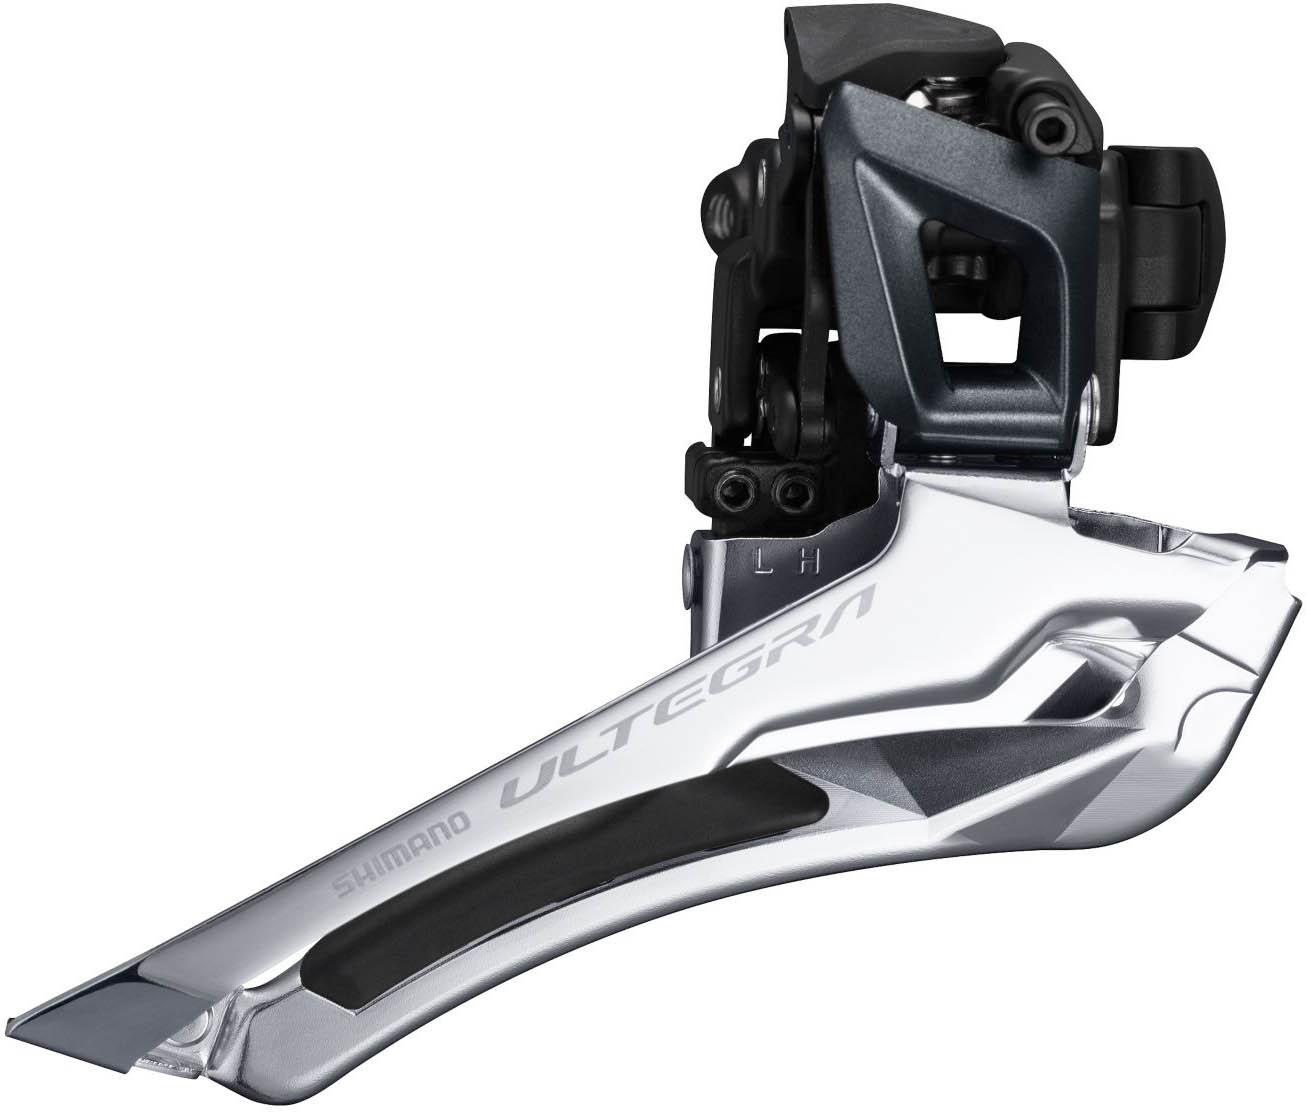 Shimano Ultegra R8000 11 Speed Band On Front Derailleur - Grey